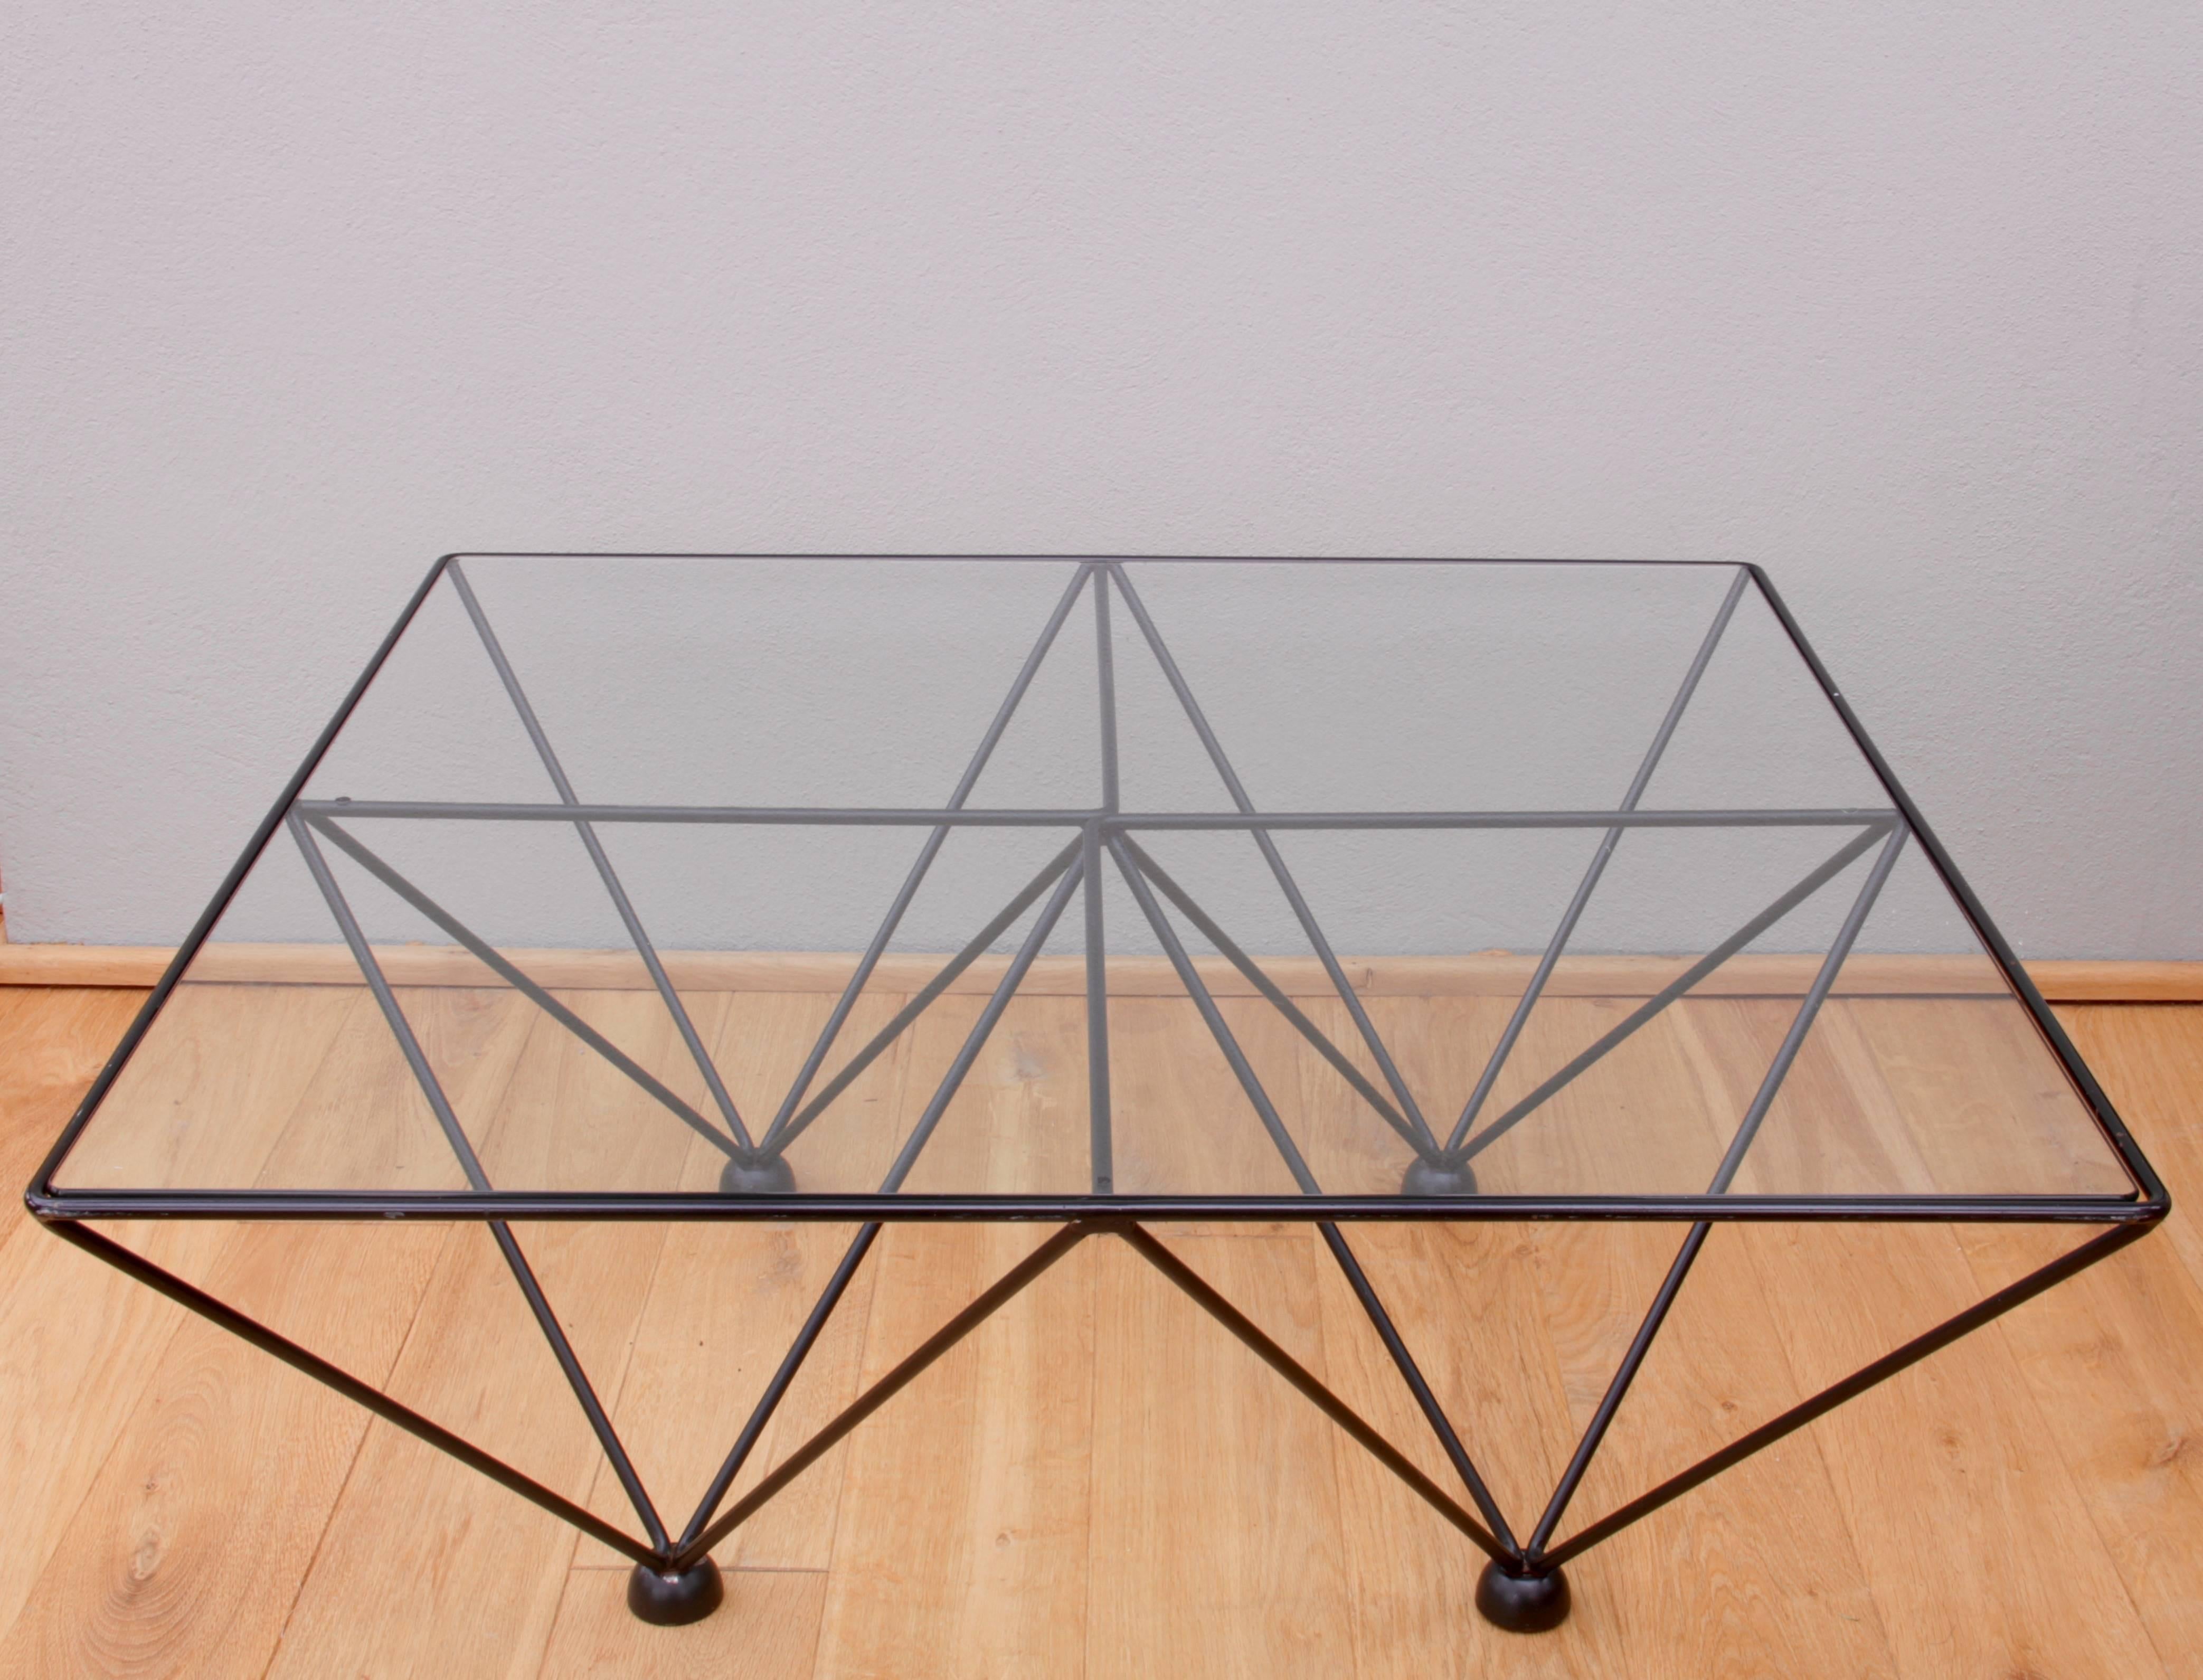 A modernist and minimalist coffee table in the style of Paolo Piva's 'Alanda' table, which was first manufactured by the Italian design company B&B Italia in 1982. The design is simply fantastic the rounded edged clear glass tabletop sits within the